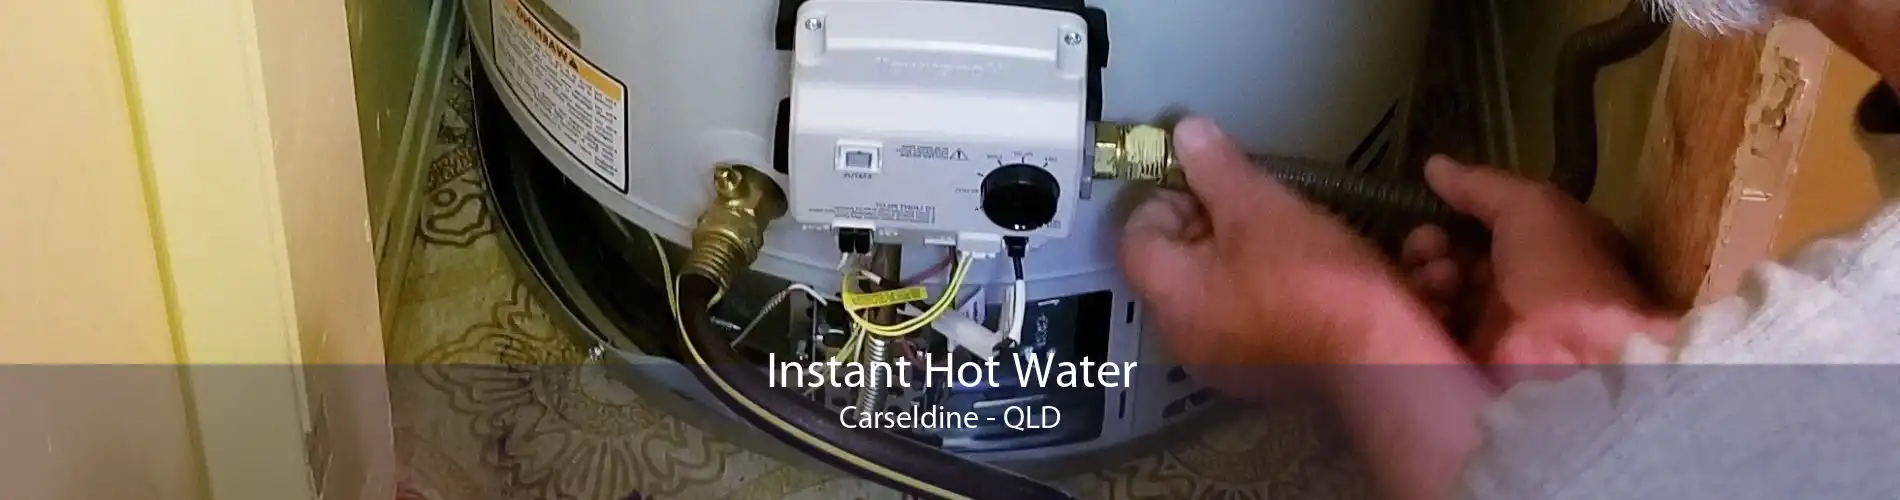 Instant Hot Water Carseldine - QLD